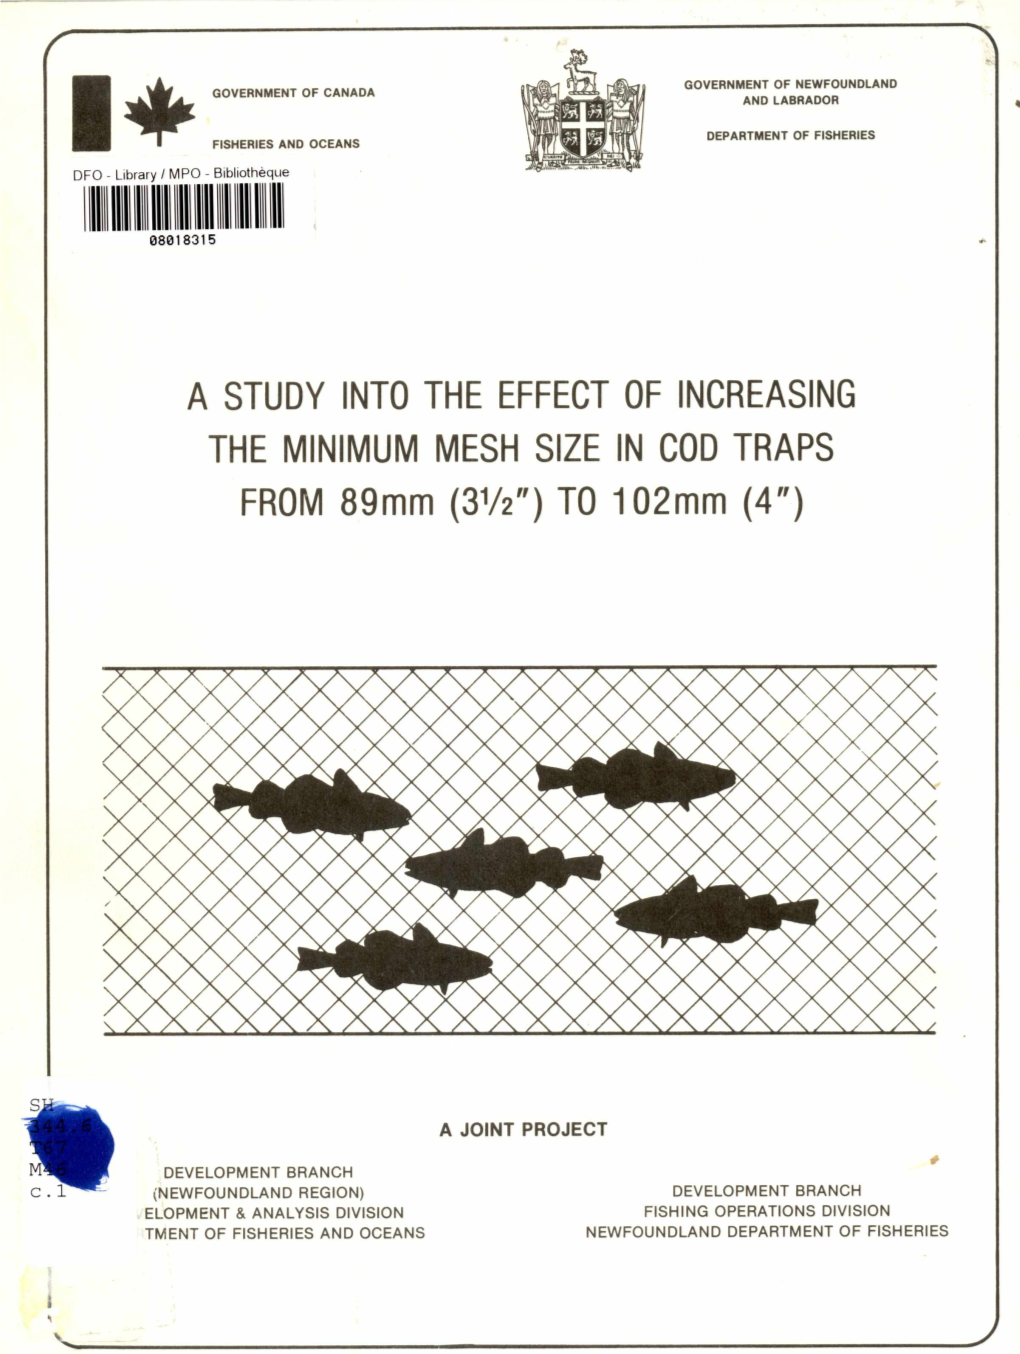 A STUDY INTO the EFFECT of INCREASING the MINIMUM MESH SIZE in COD TRAPS from 89Mm (31/2") to 102Mm (4")